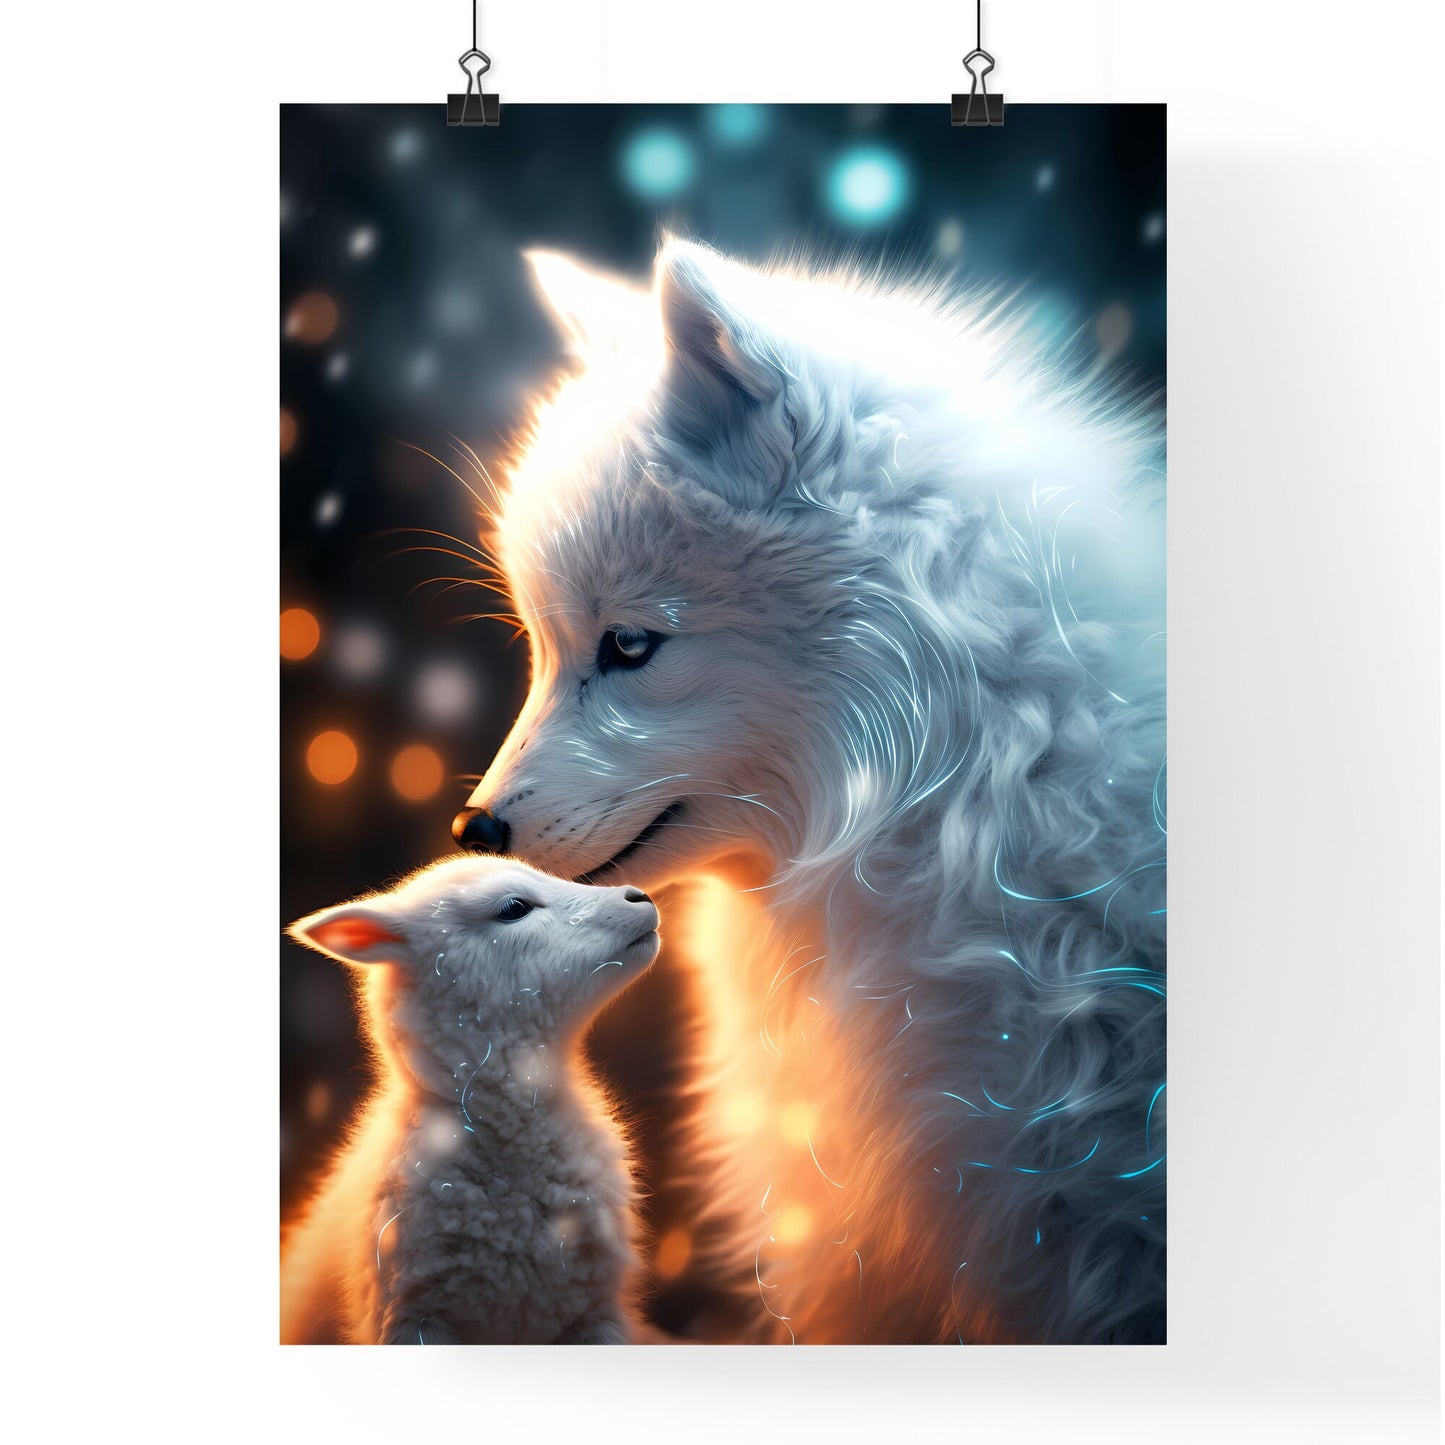 A Poster of A wolf is petting a lamb gently - A White Wolf And A Lamb Default Title